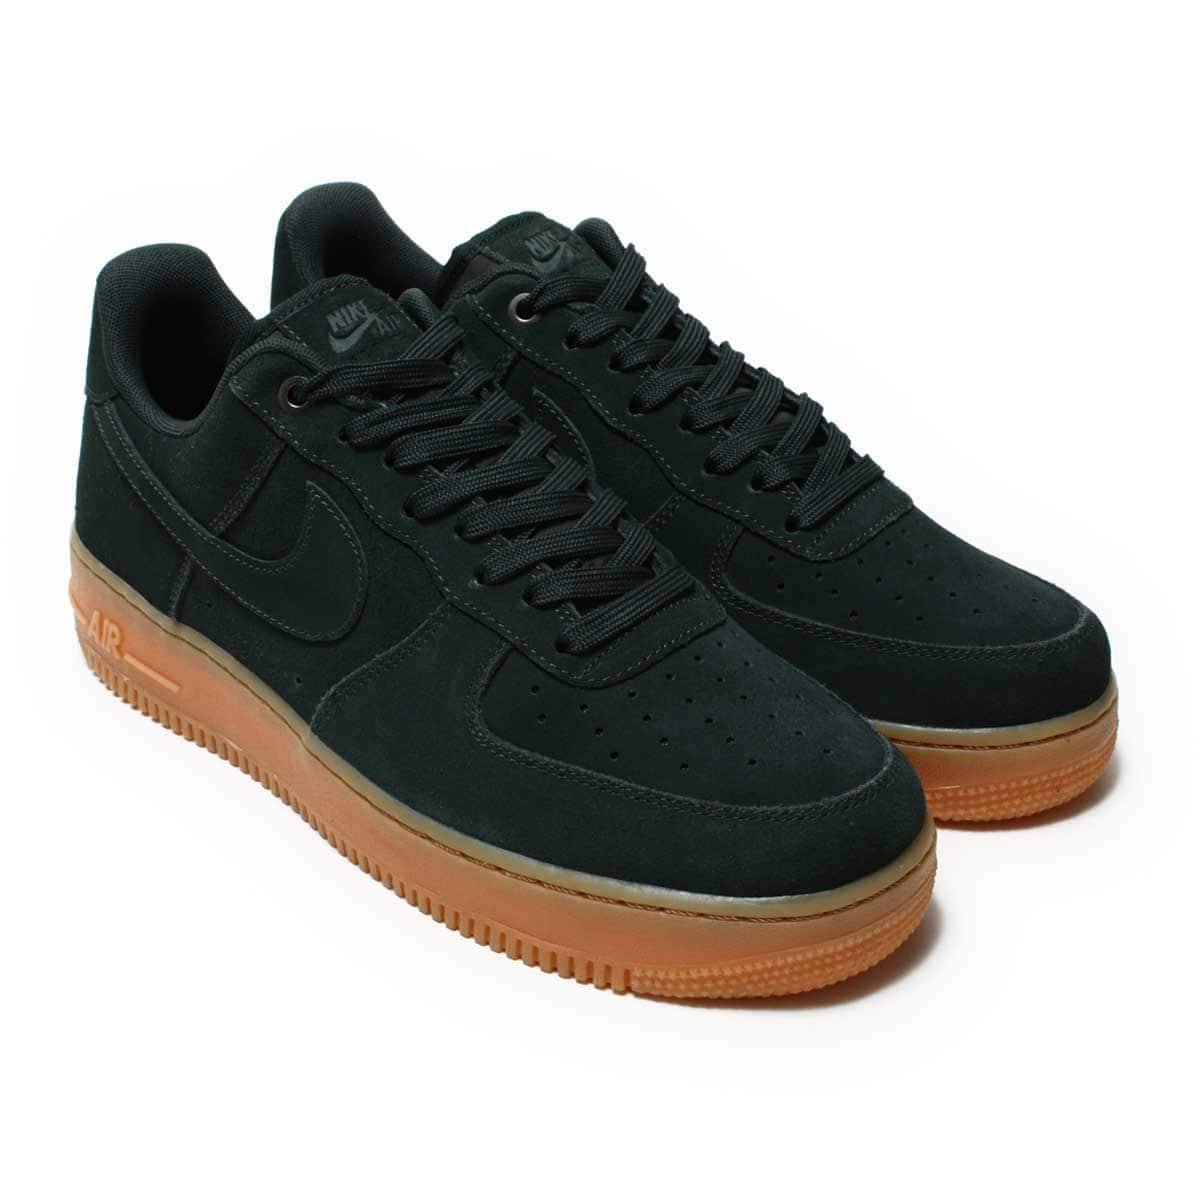 NIKE AIR FORCE 1 '07 LV8 SUEDE OUTDOOR 